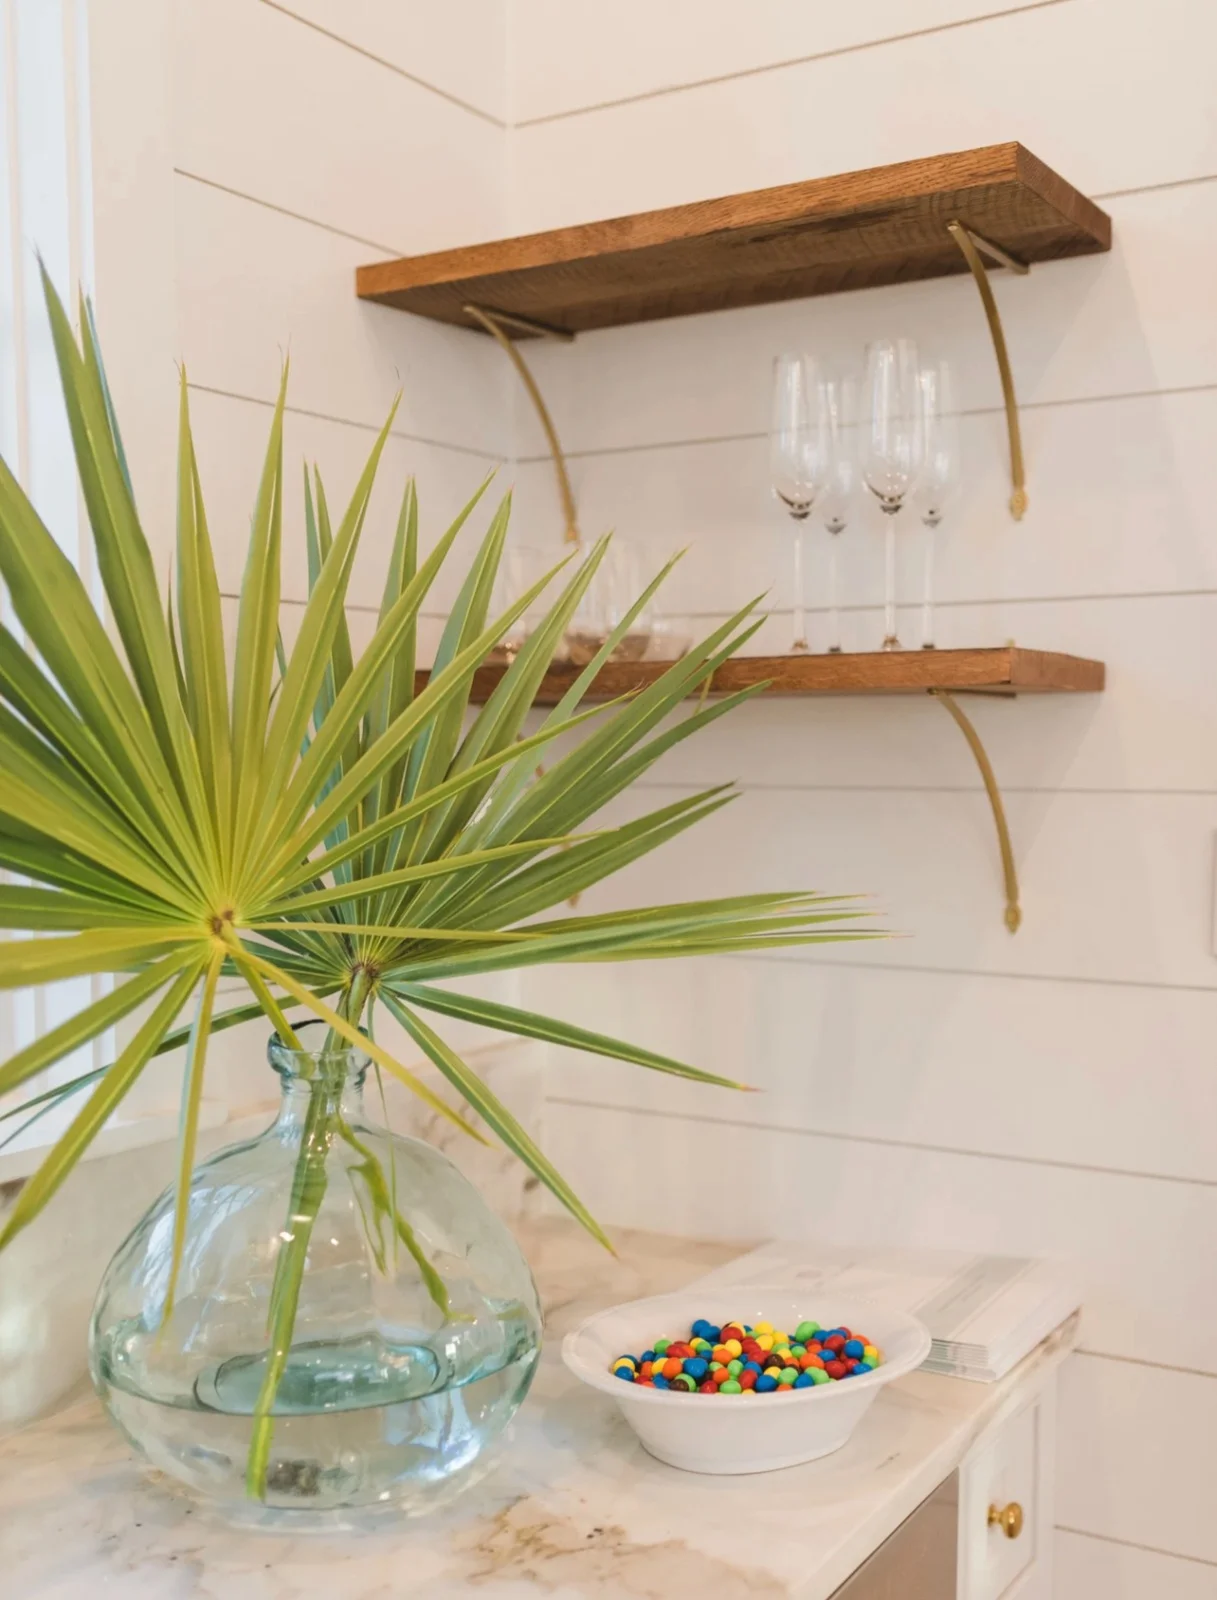 Wooden shelves with glasses on them and a plant in front.